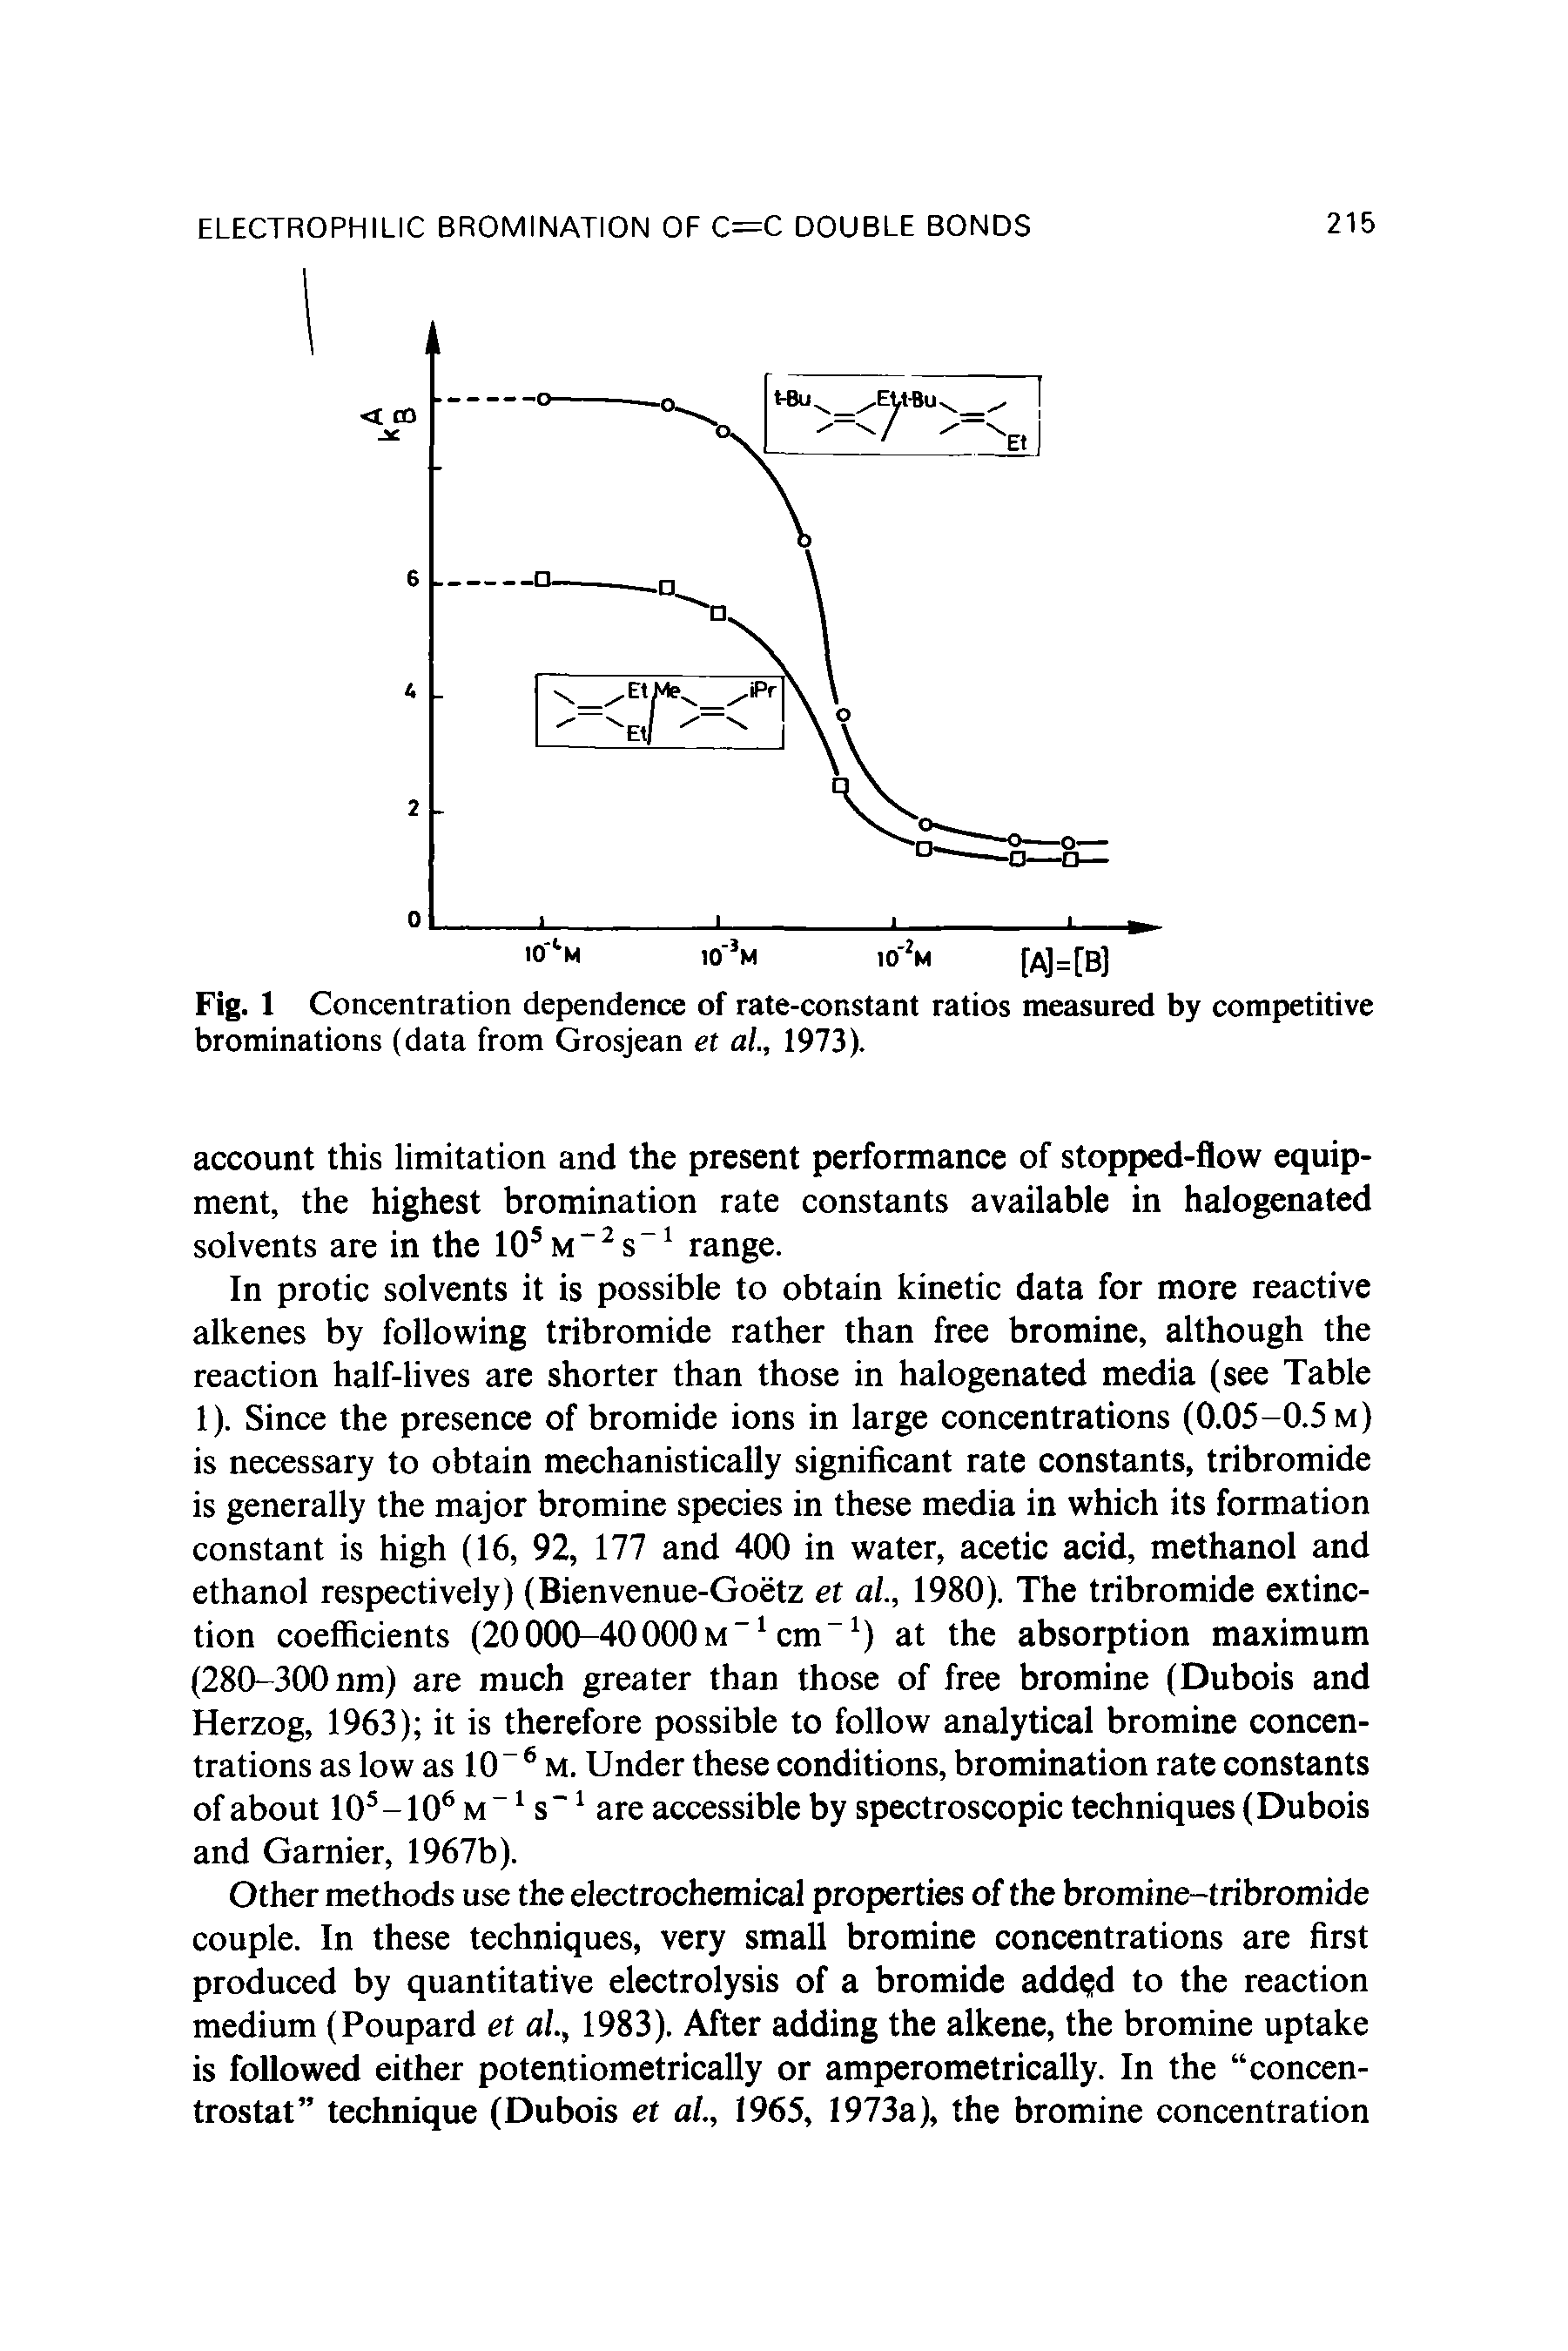 Fig. 1 Concentration dependence of rate-constant ratios measured by competitive brominations (data from Grosjean et al., 1973).